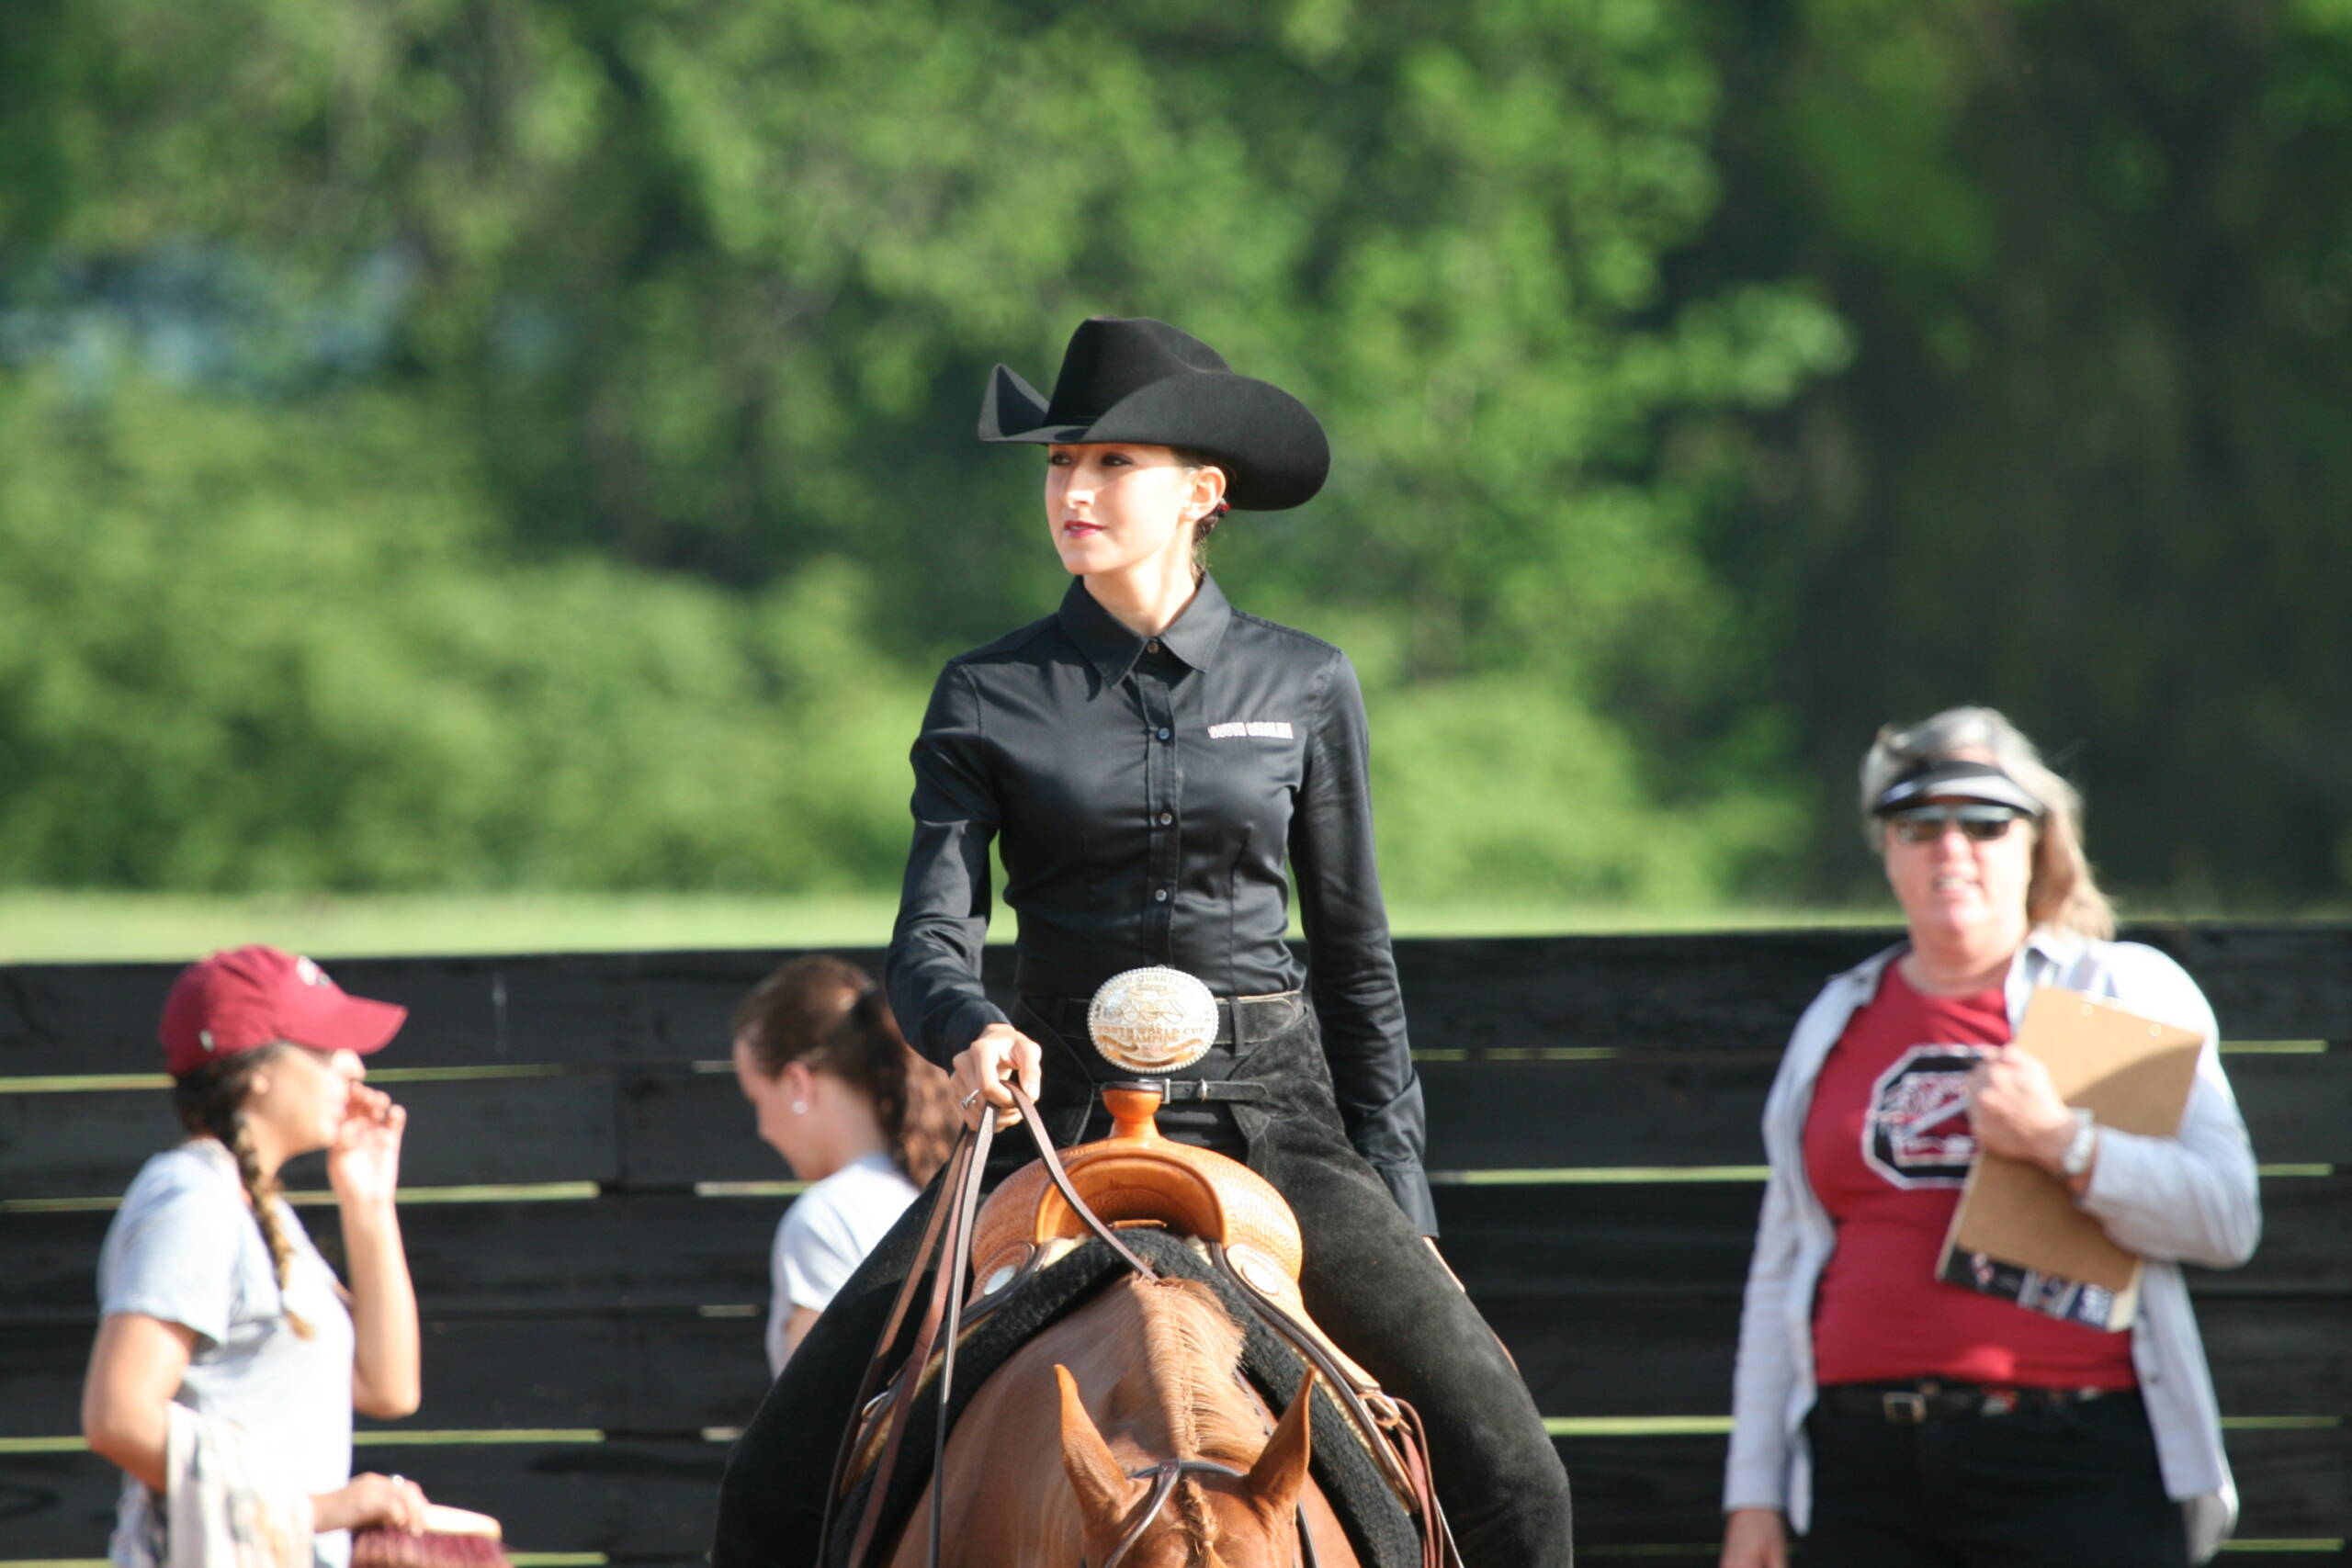 Former Equestrian Student-Athlete Helping Others with Their Competition Mentality